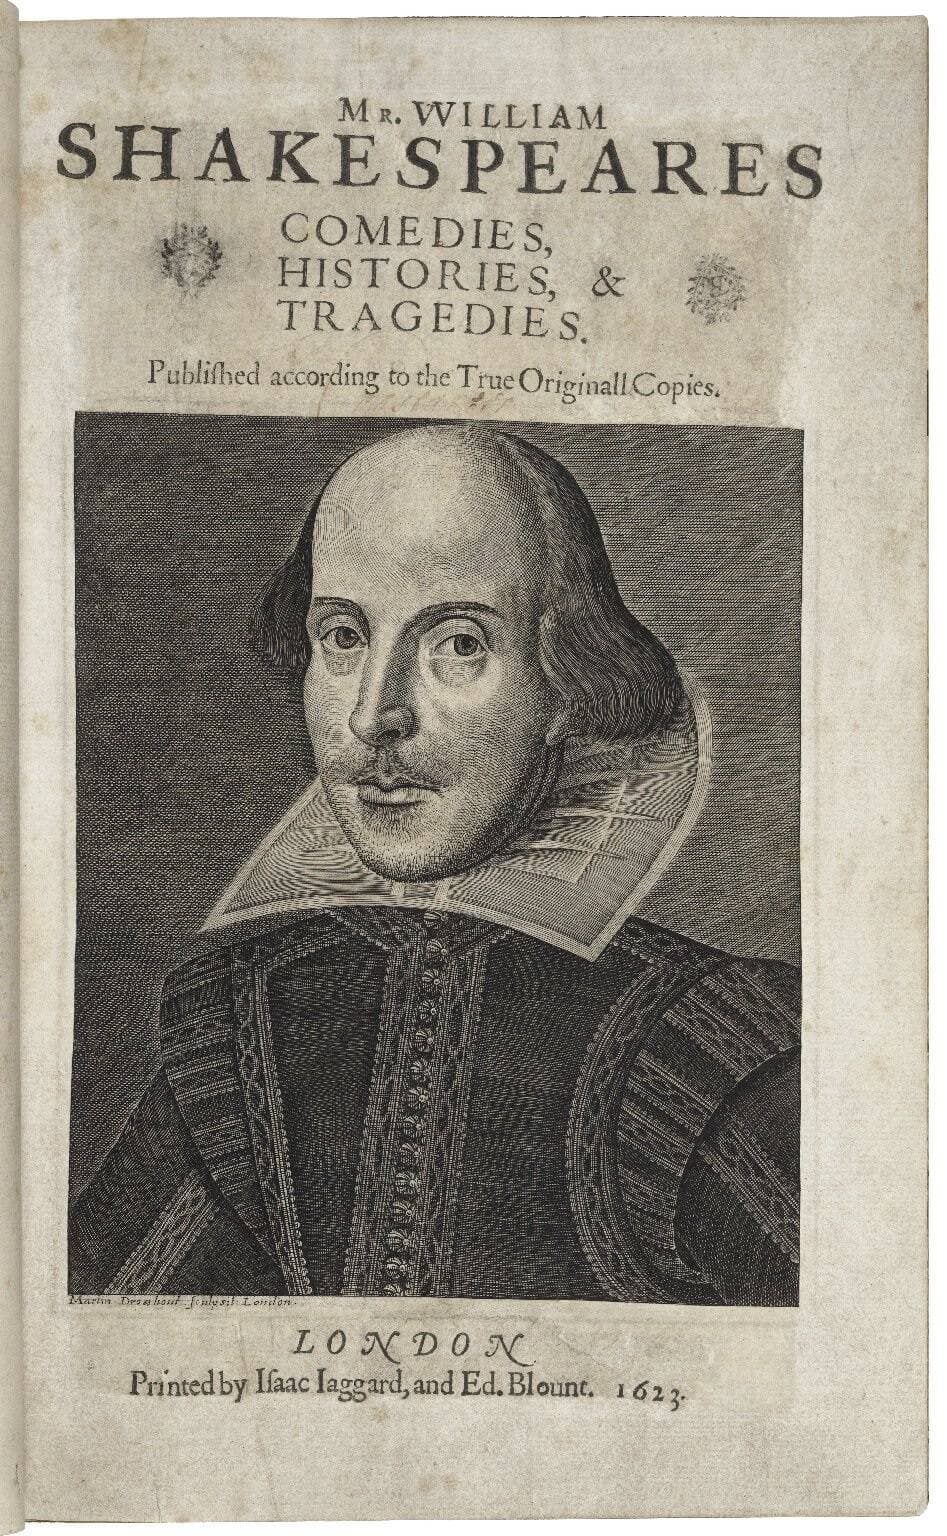 400 Years After Shakespeare S First Folio Publication Folger Library To Display All 82 Owned